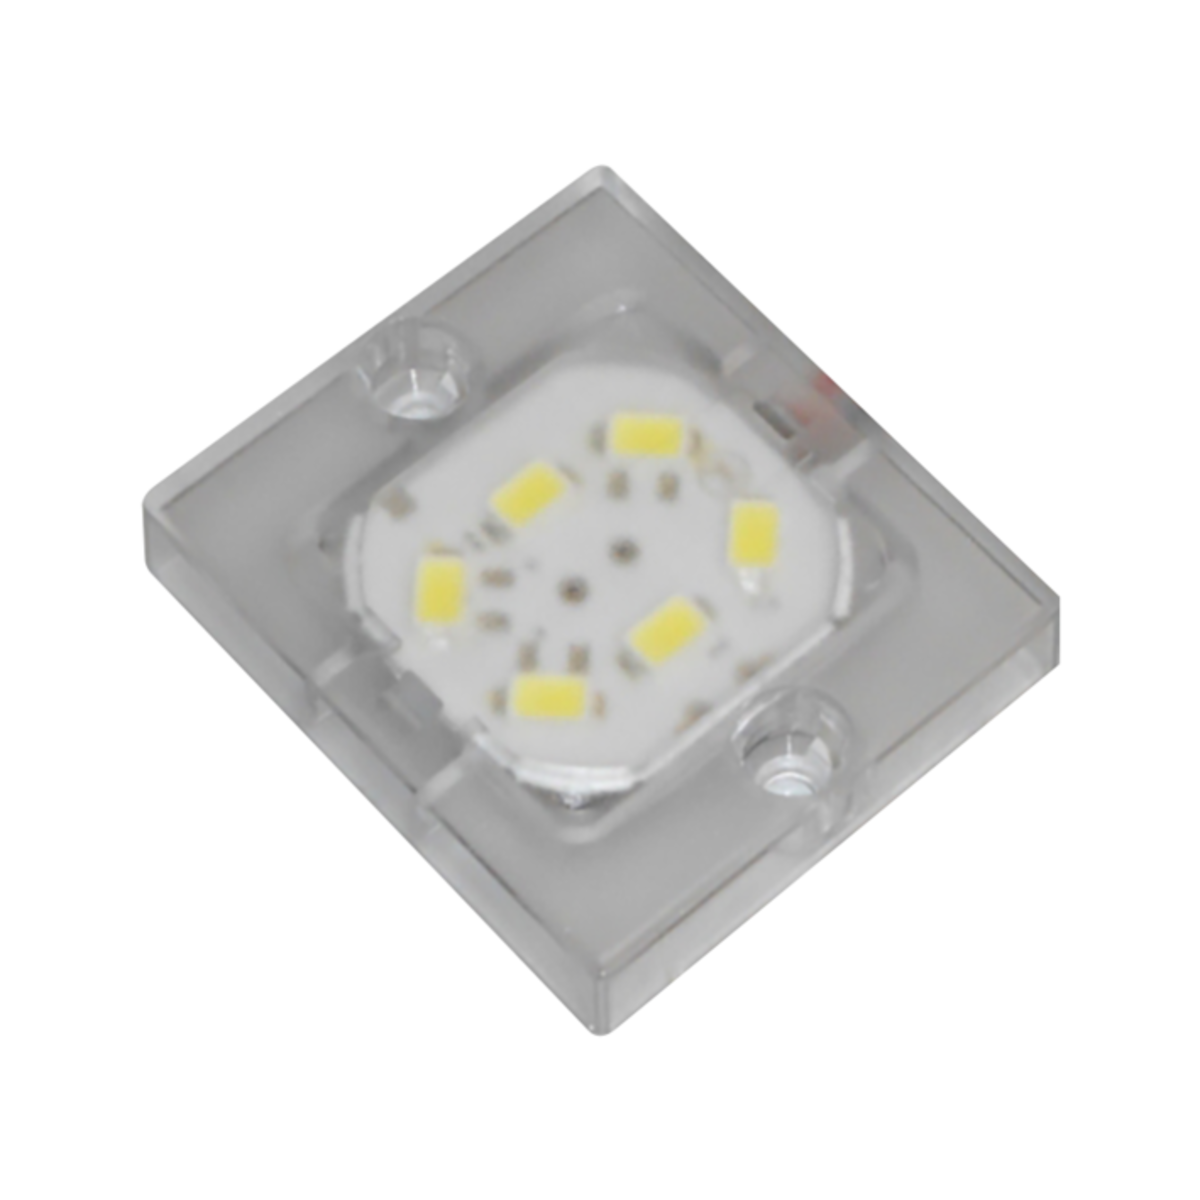 INDOOR DOME LED LIGHT